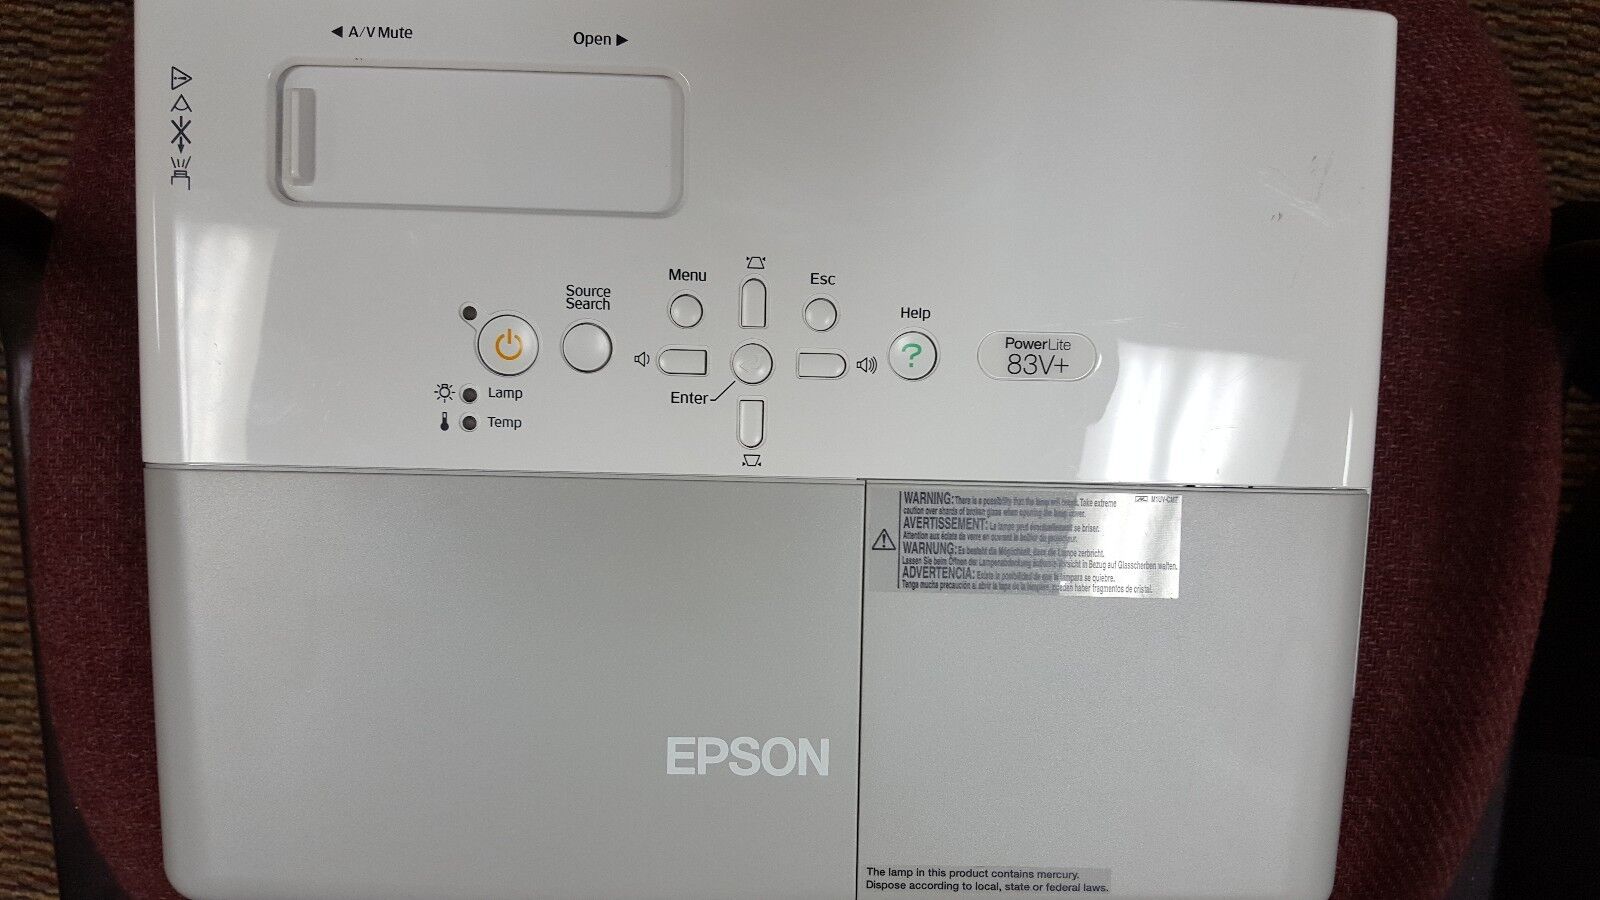 Epson PowerLite 83V+ LCD Projector, A Steal